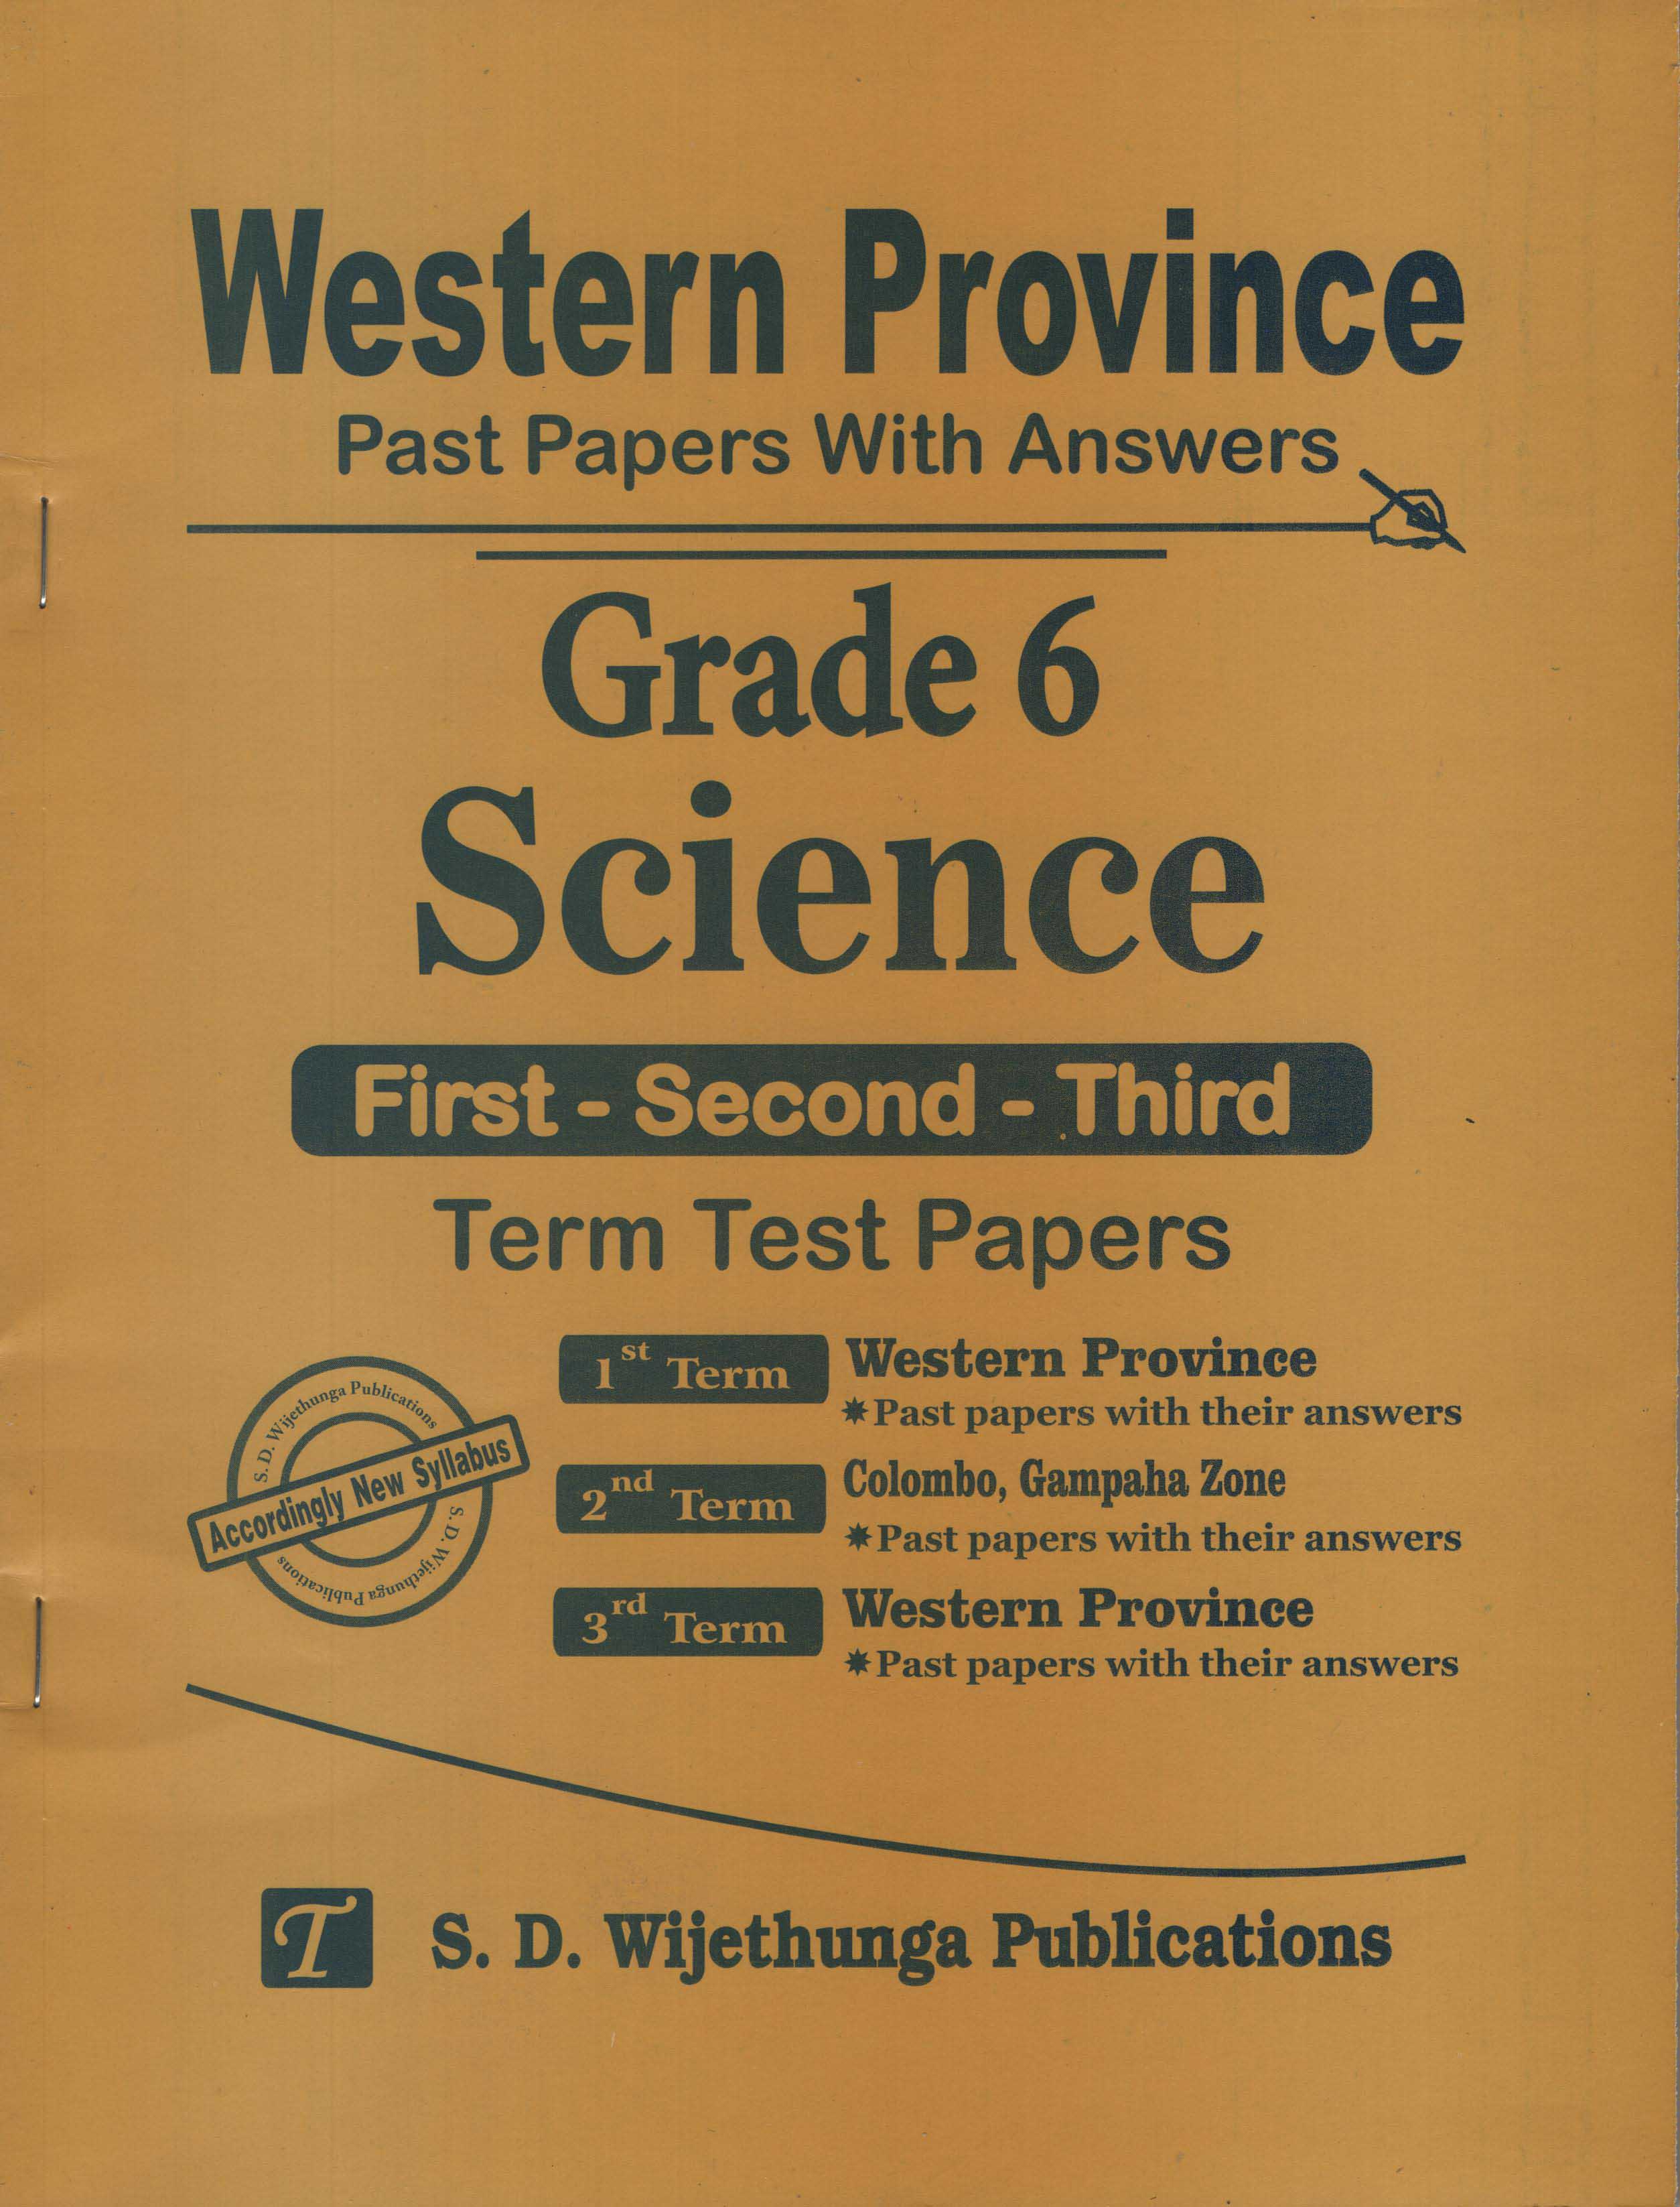 grade 6 science 2nd term paper